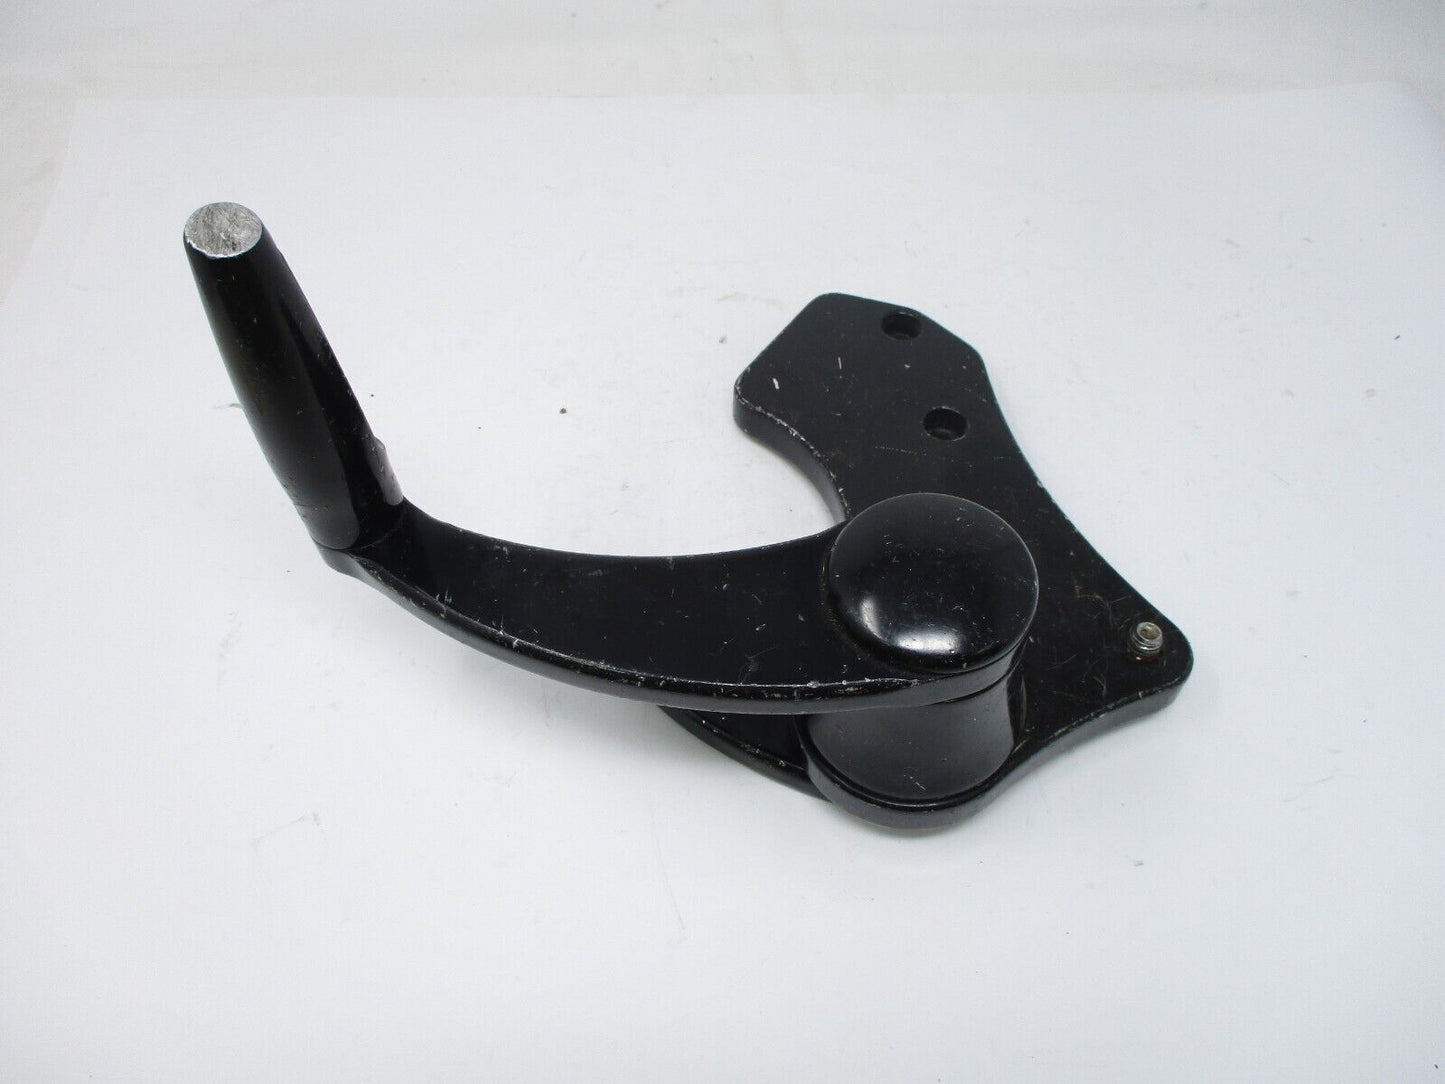 HHI Brand Steel Left Side Forward Control Shifter and Mount (Bent)